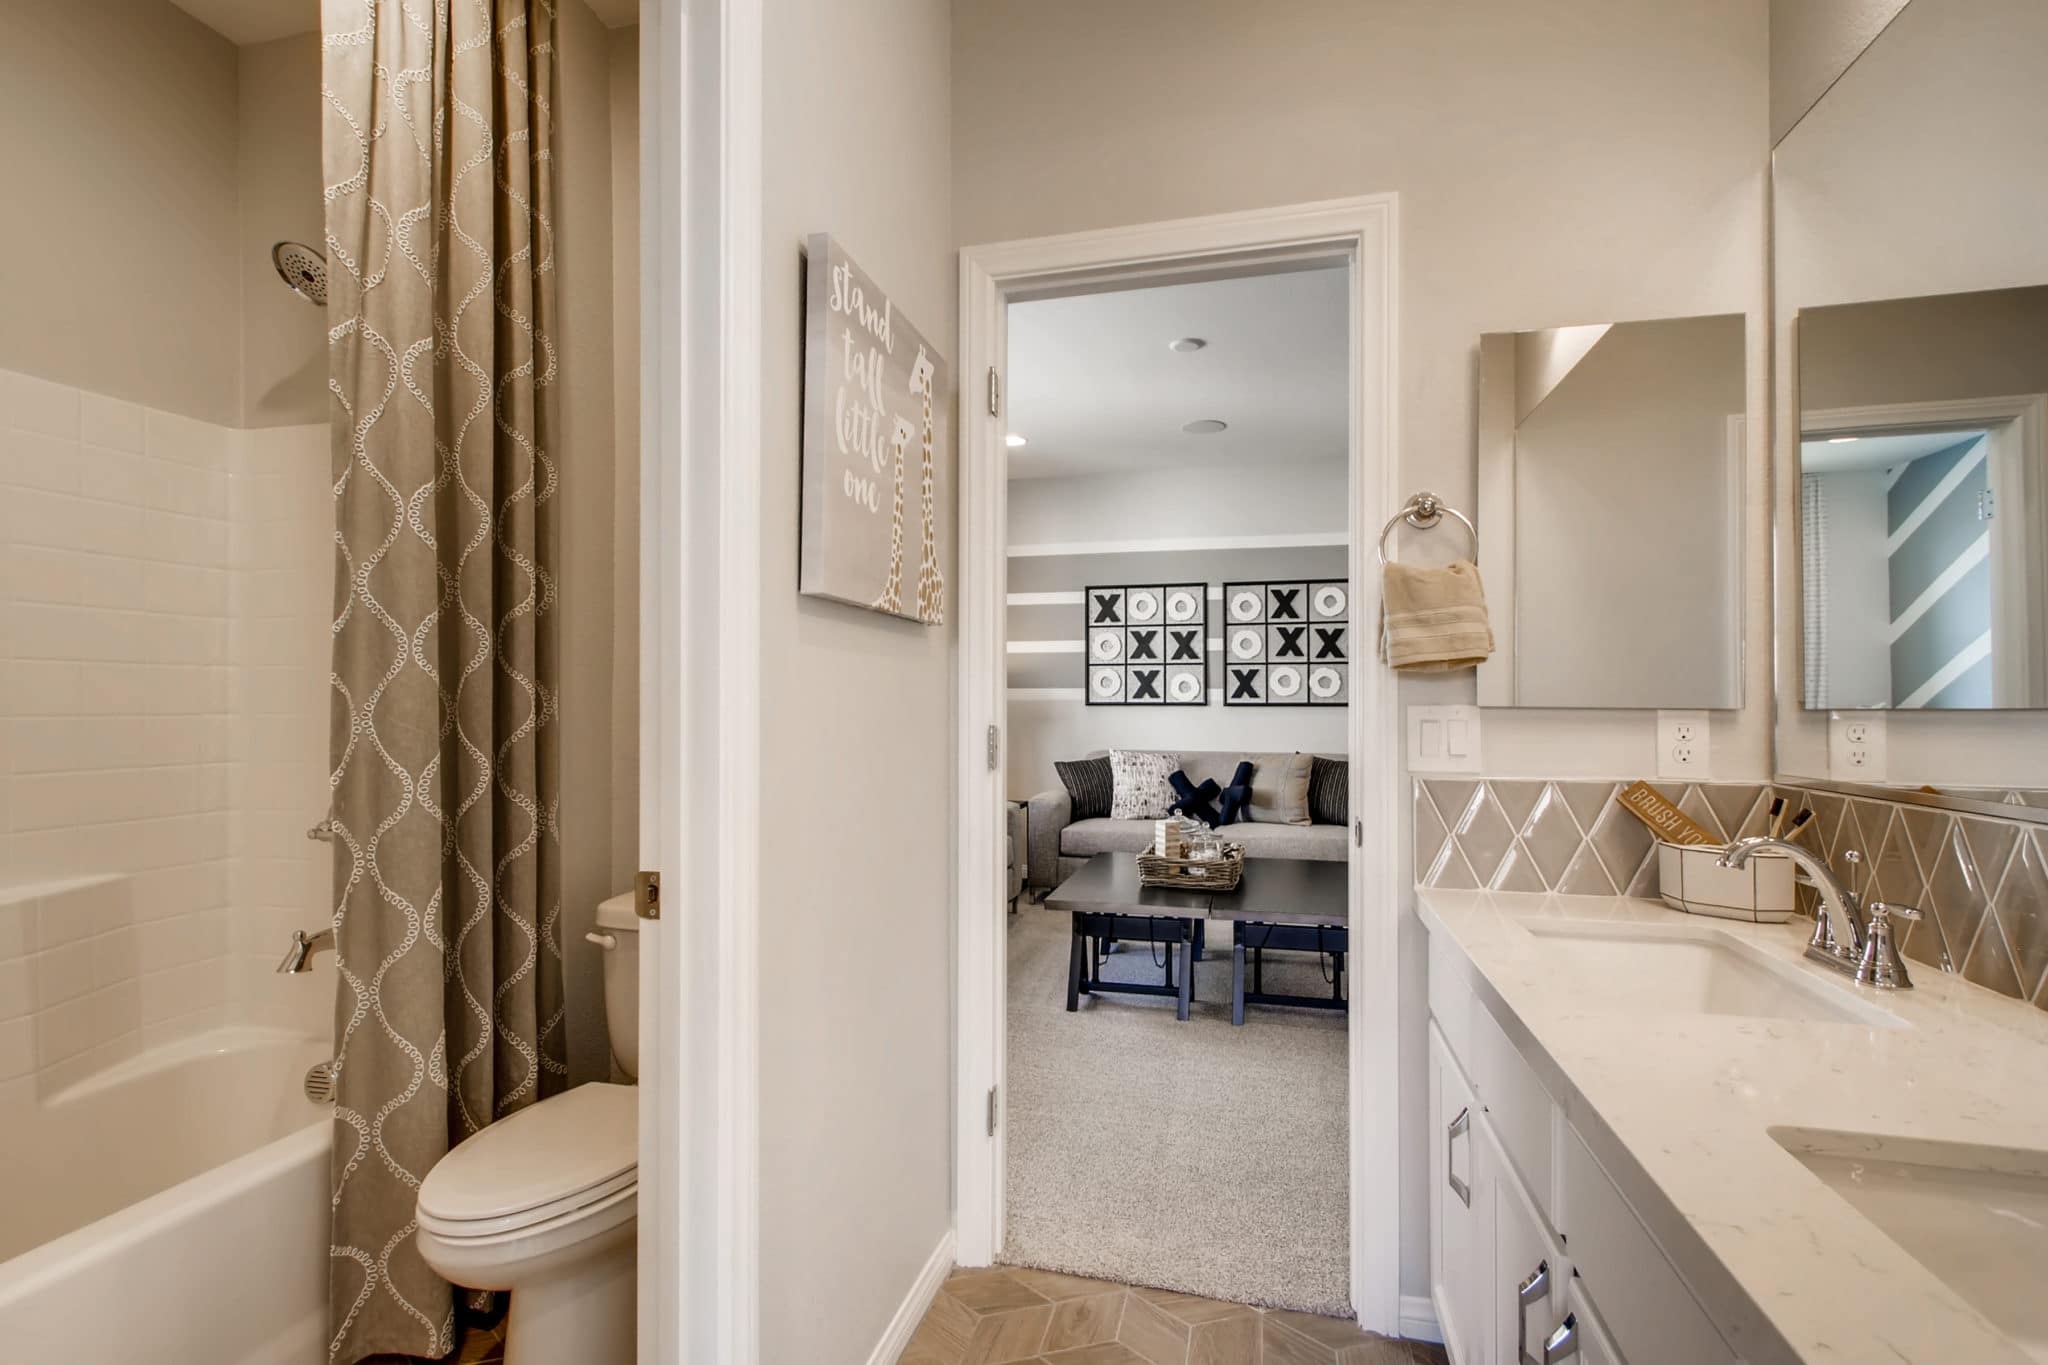 Bathroom of Mojave Plan at Crystal Canyon by Woodside Homes